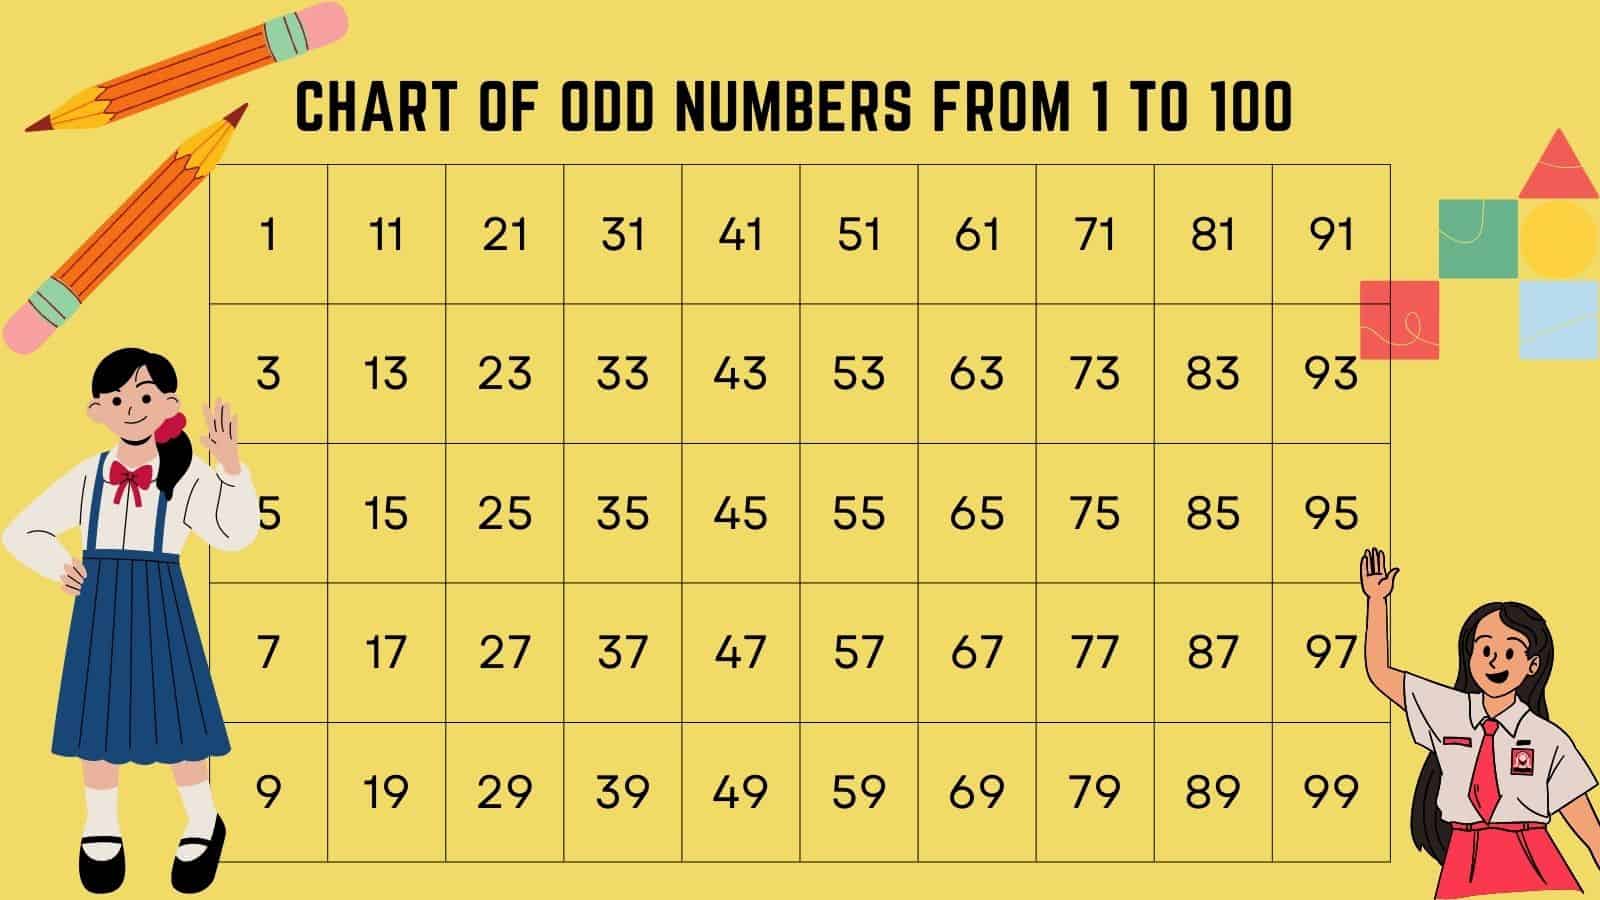 Chart of odd numbers from 1 to 100